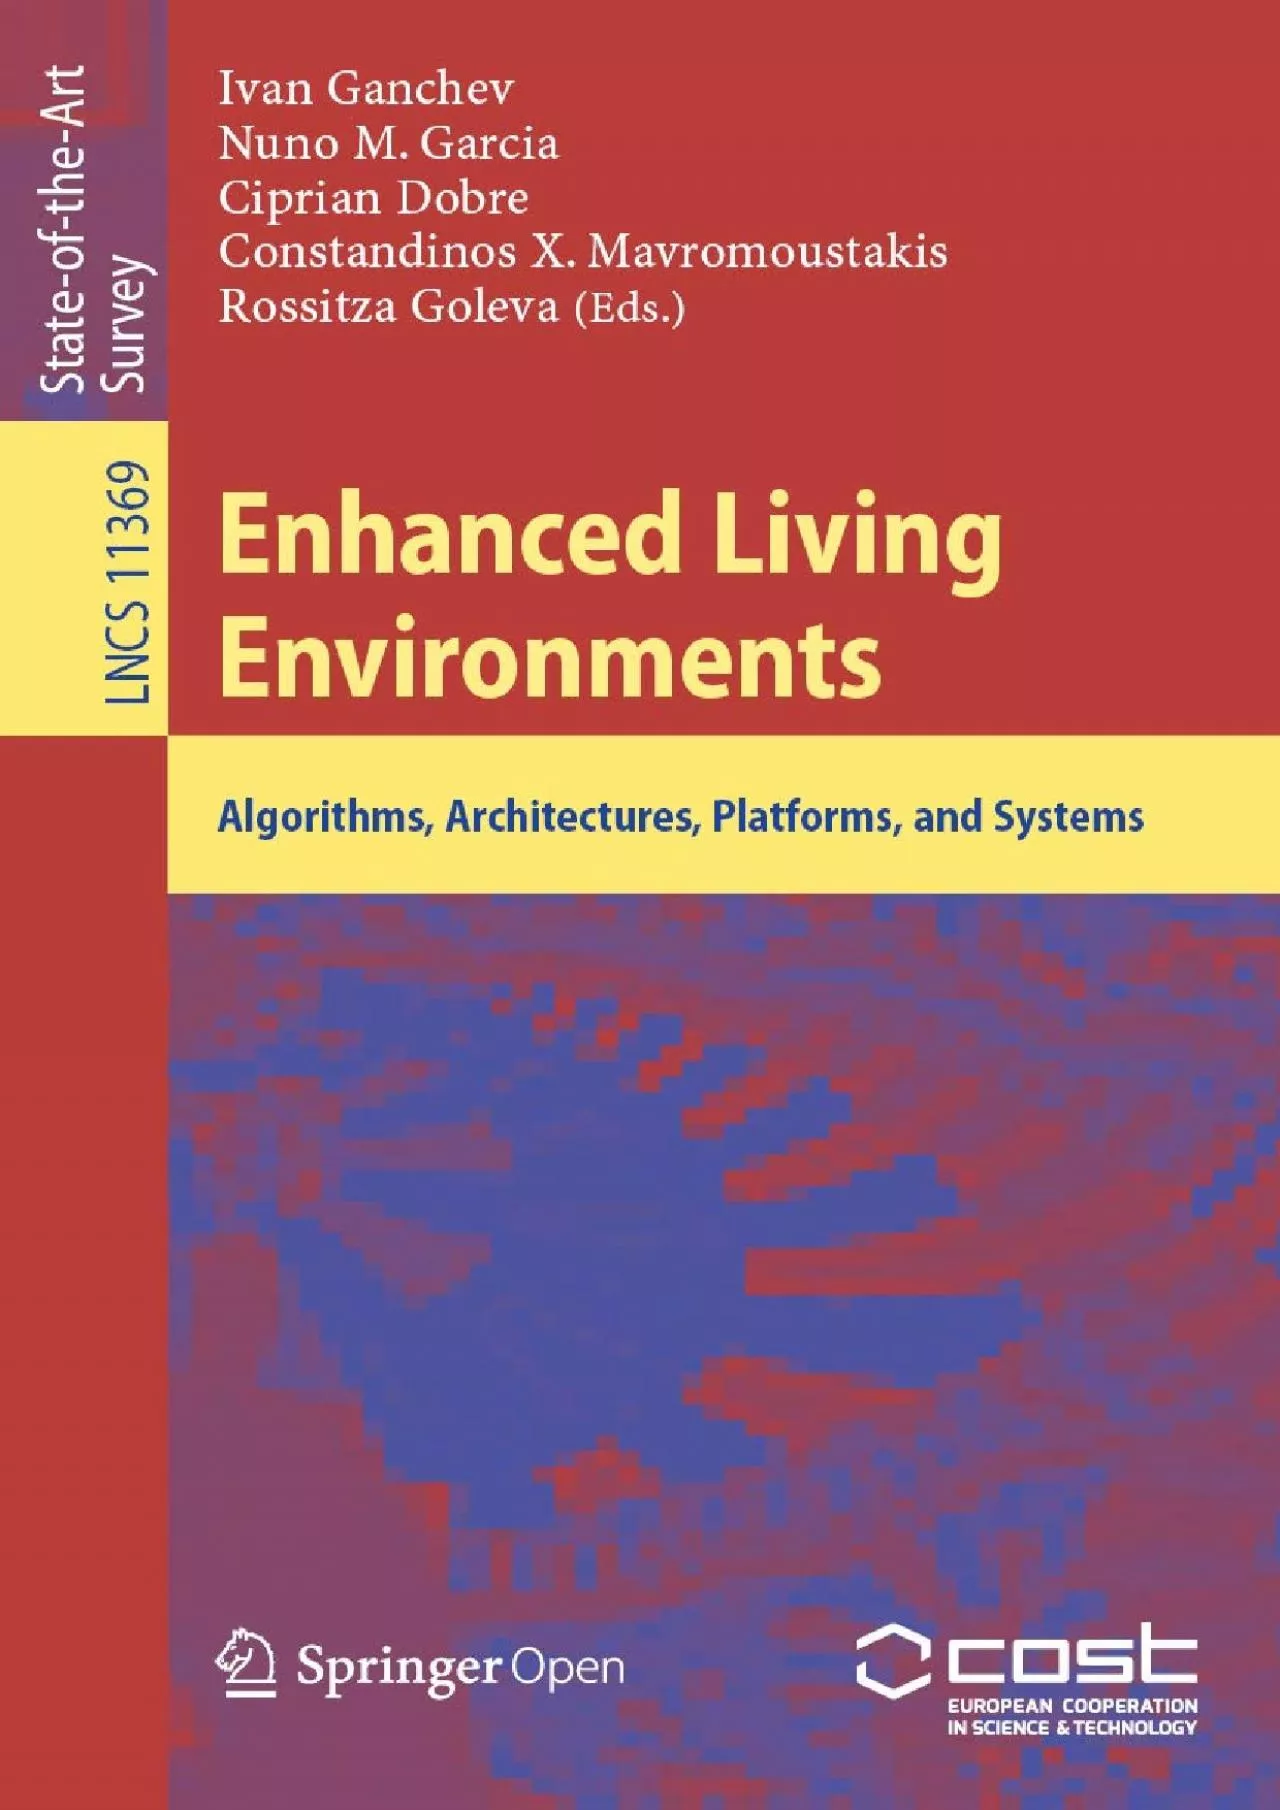 (EBOOK)-Enhanced Living Environments Algorithms Architectures Platforms and Systems (Lecture